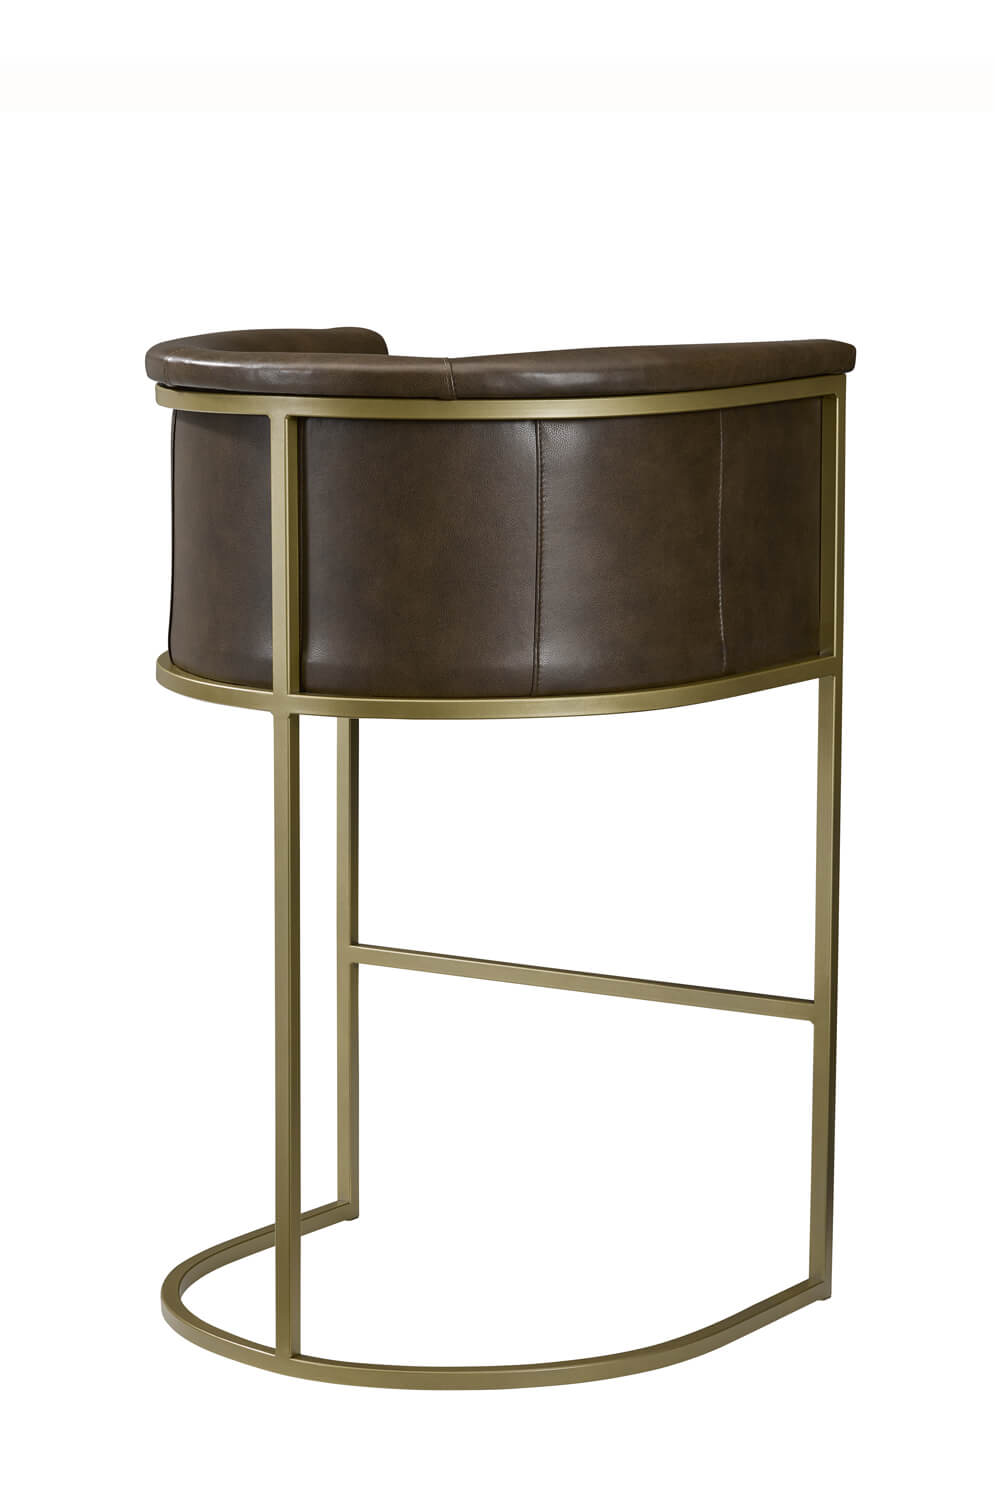 Leathercraft's Hank 588 Modern Metal Bar Stool with Curved Low Back - Back View